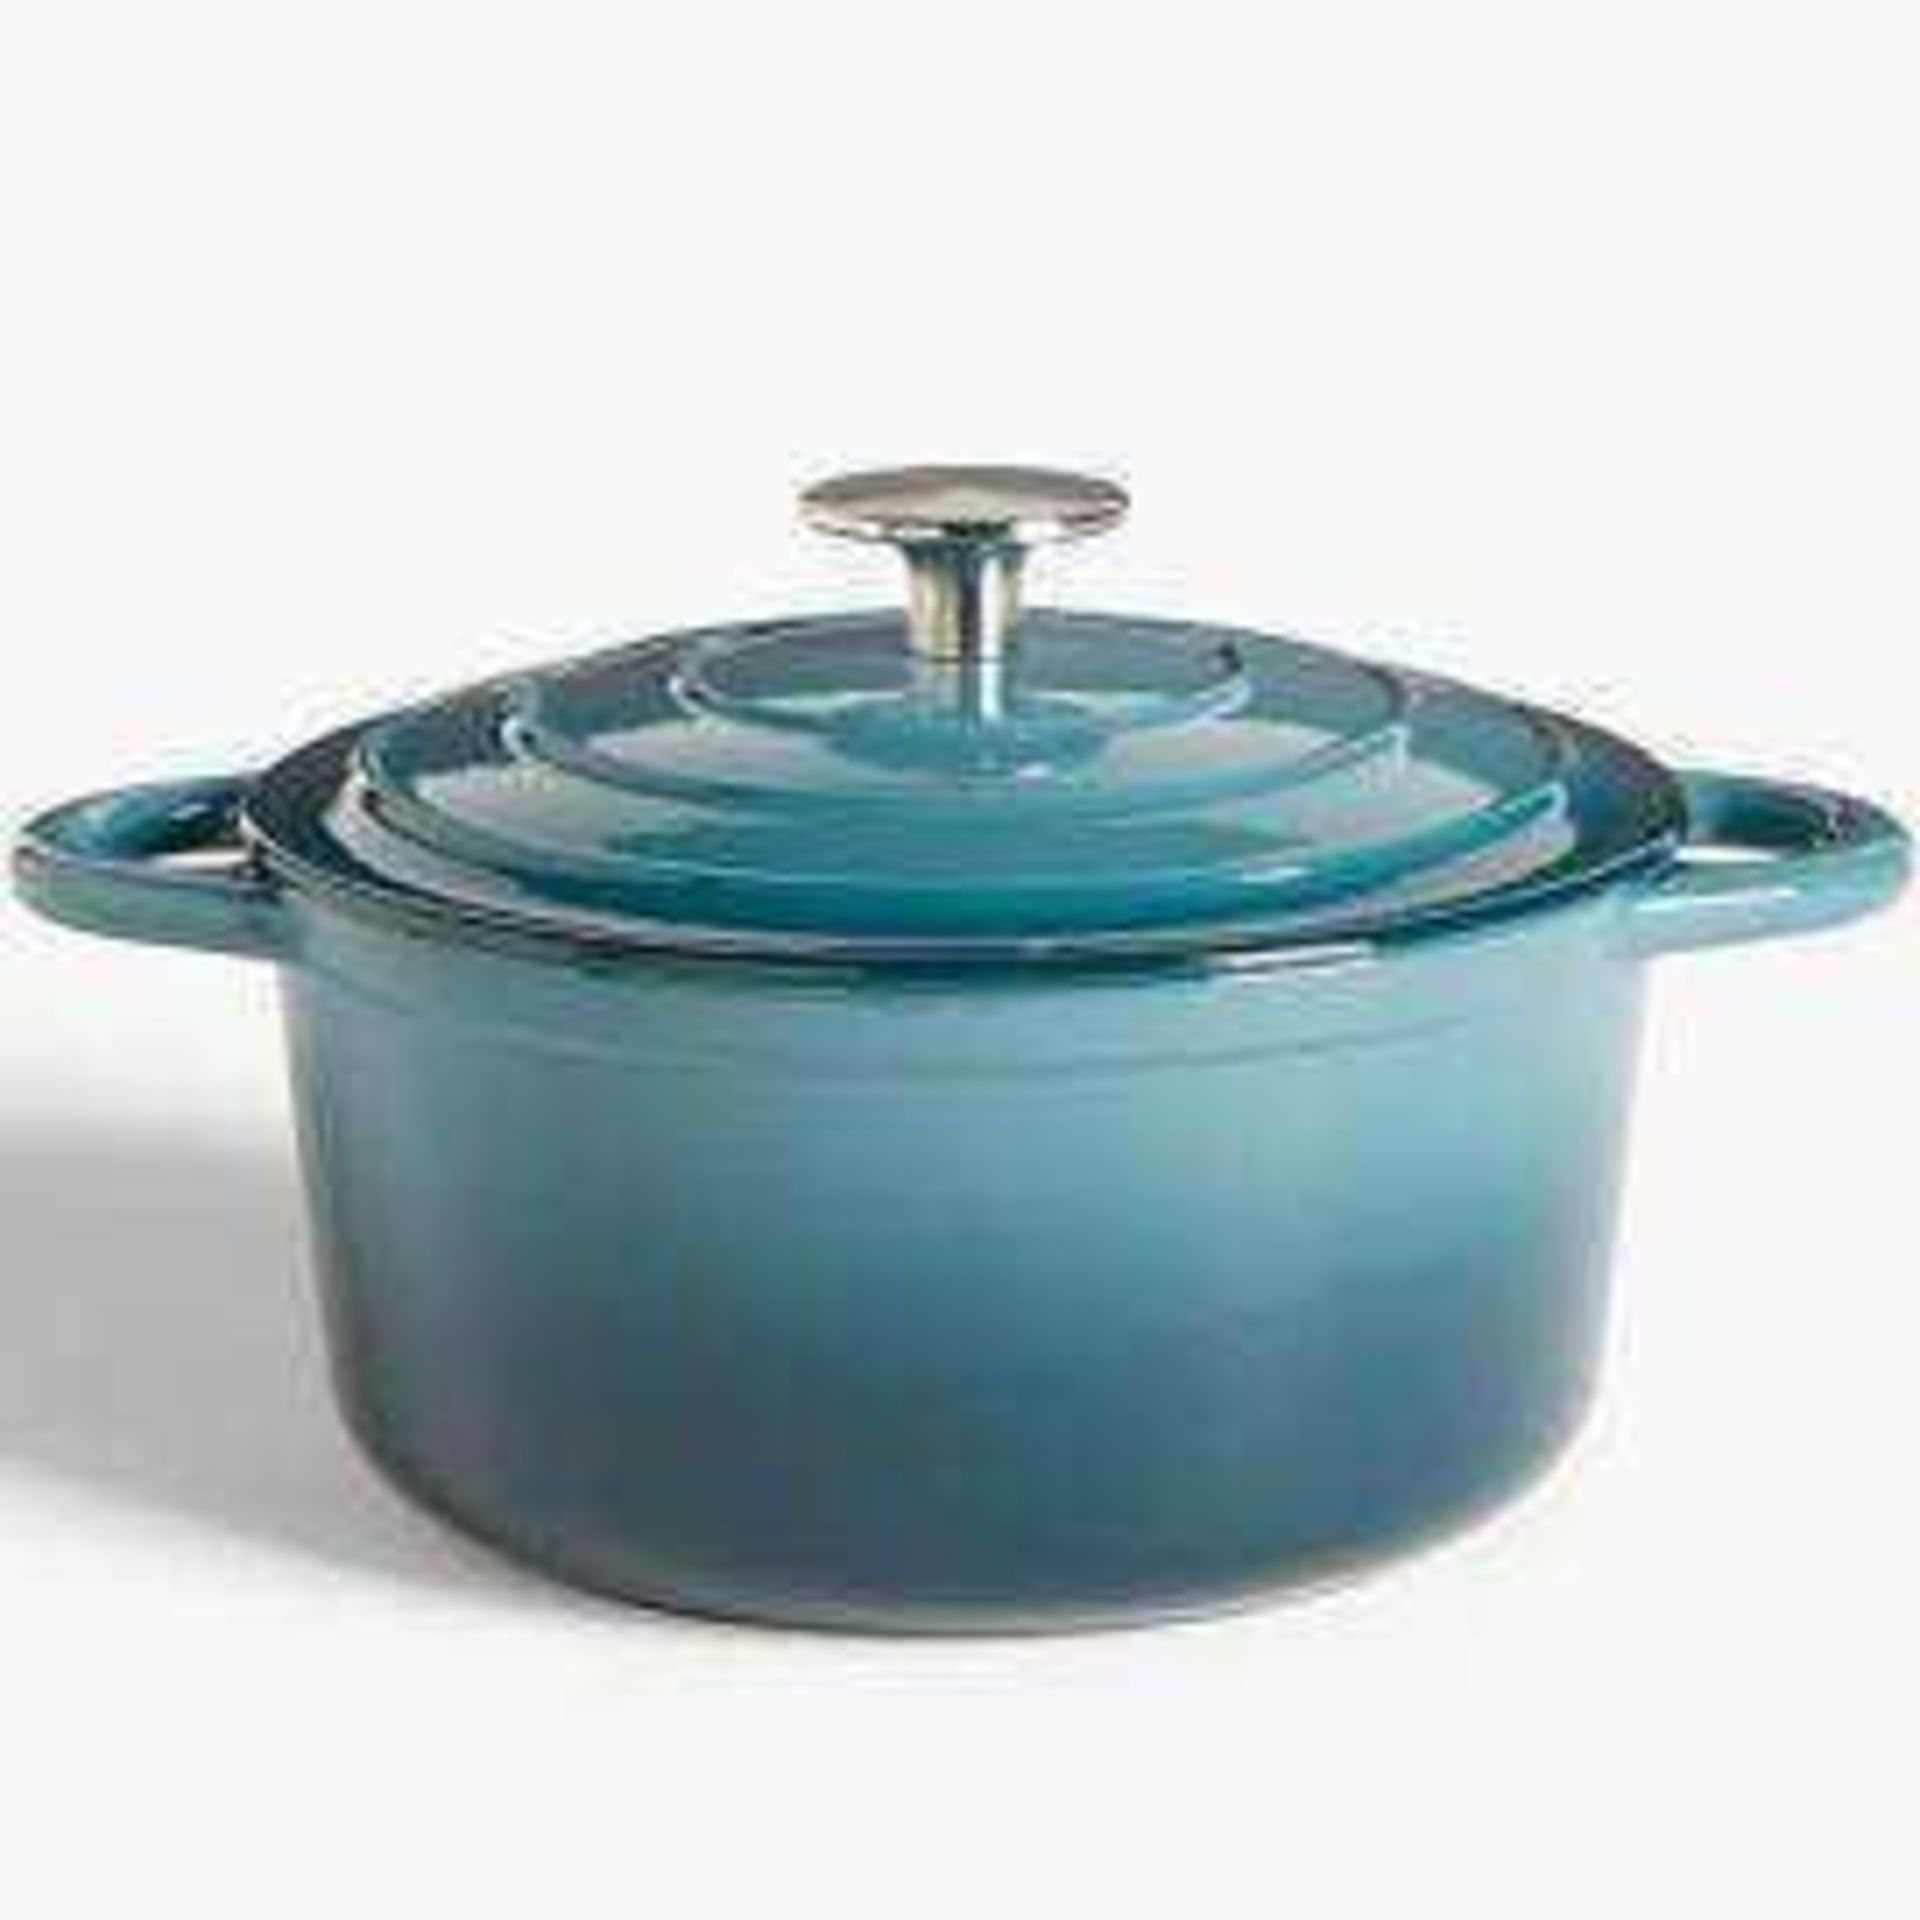 Combined RRP £185 Lot To Contain Three Boxed John Lewis Cast Iron Casserole Dishes With Lids In Size